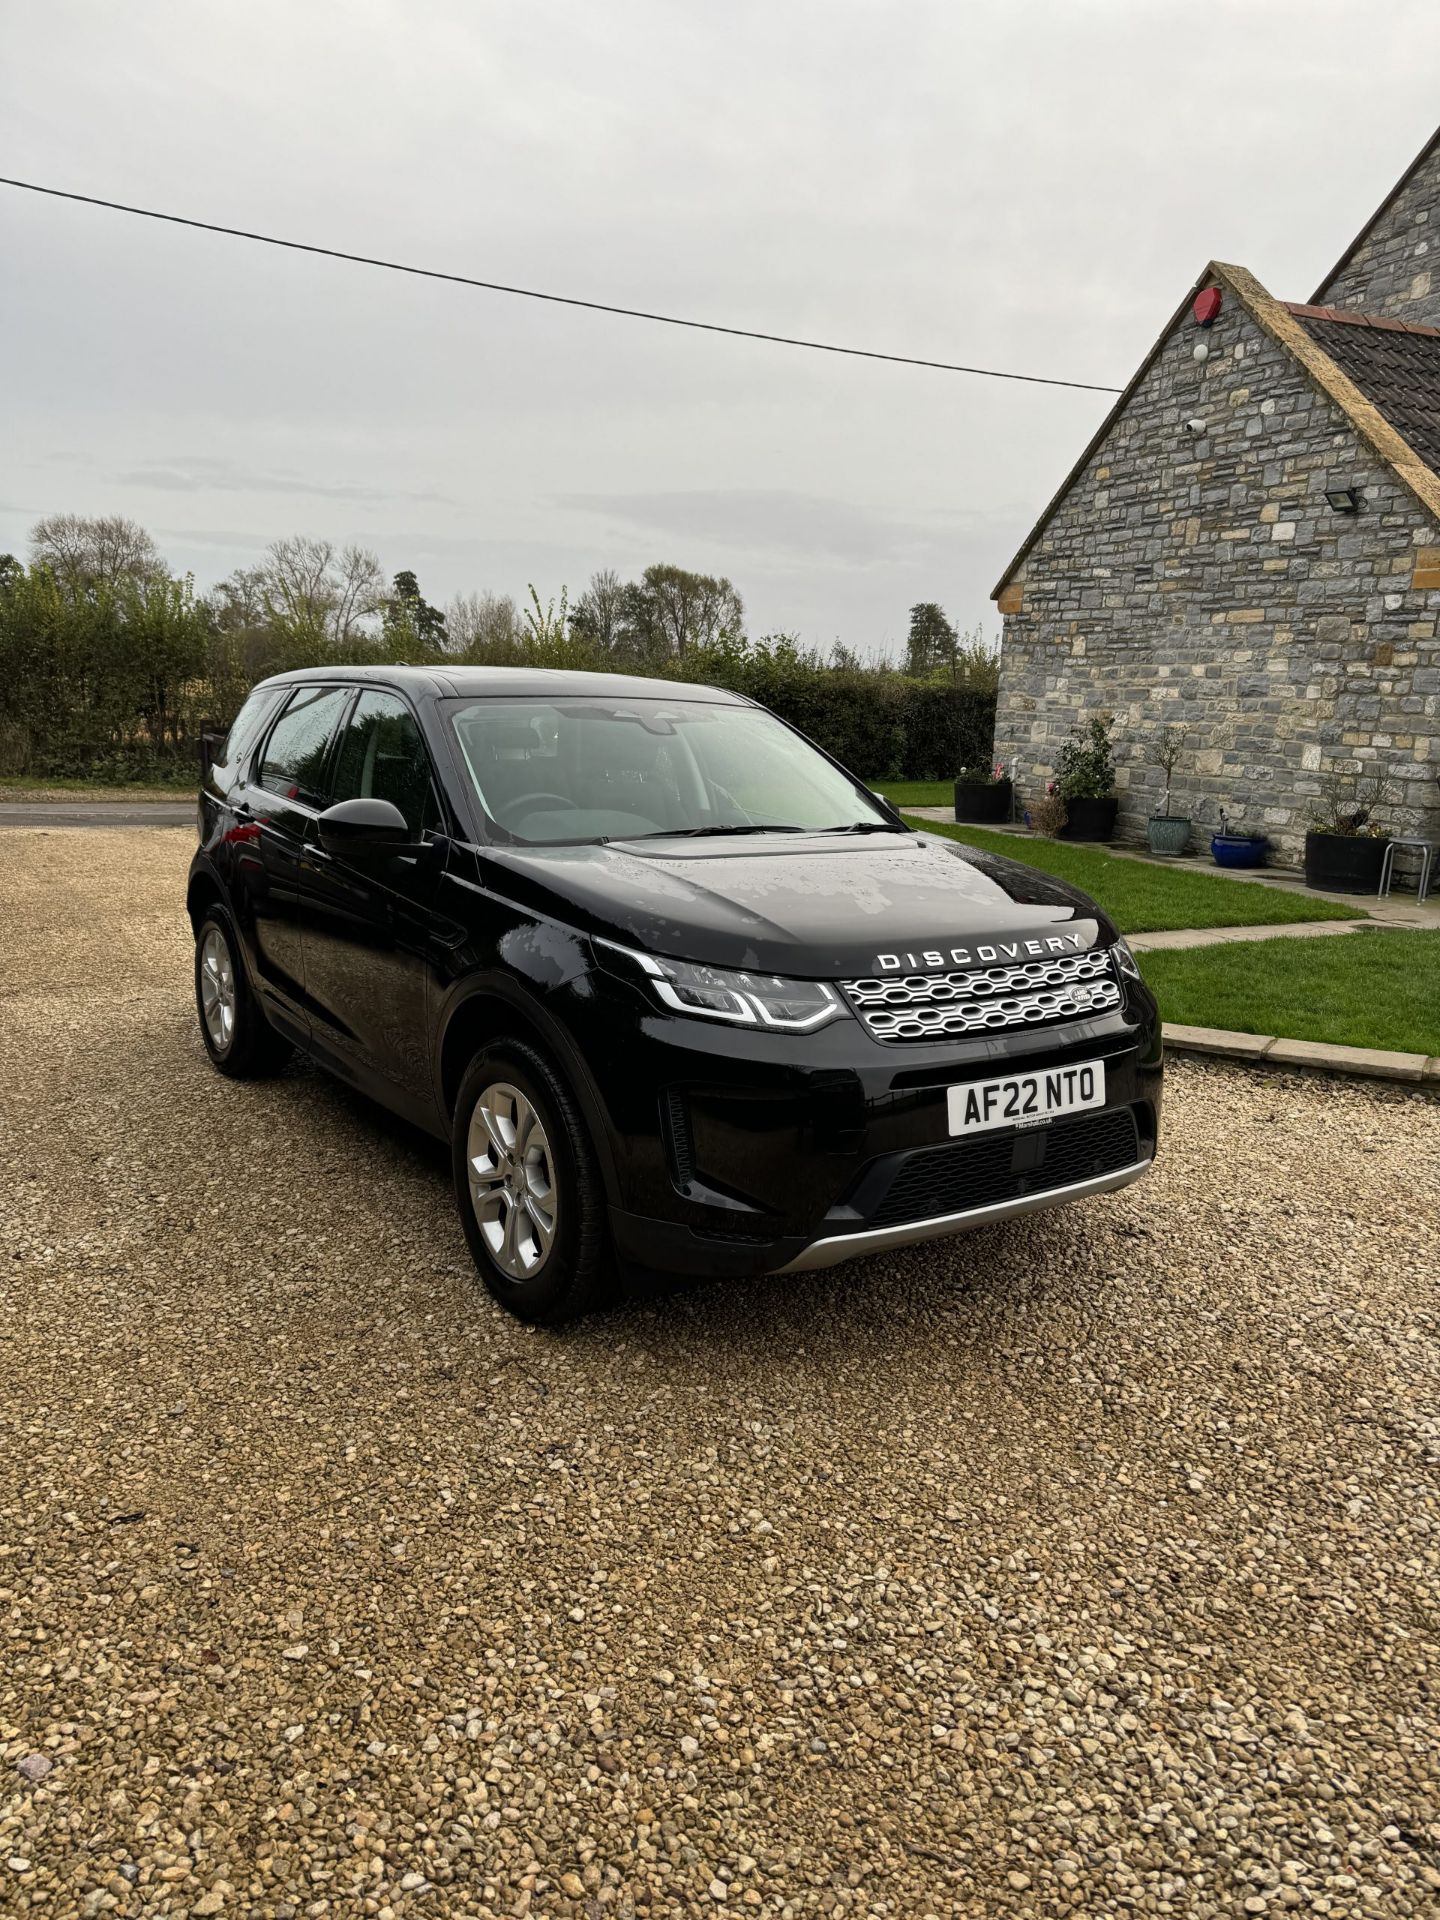 2022 LANDROVER DISCOVERY SPORT - Image 2 of 9